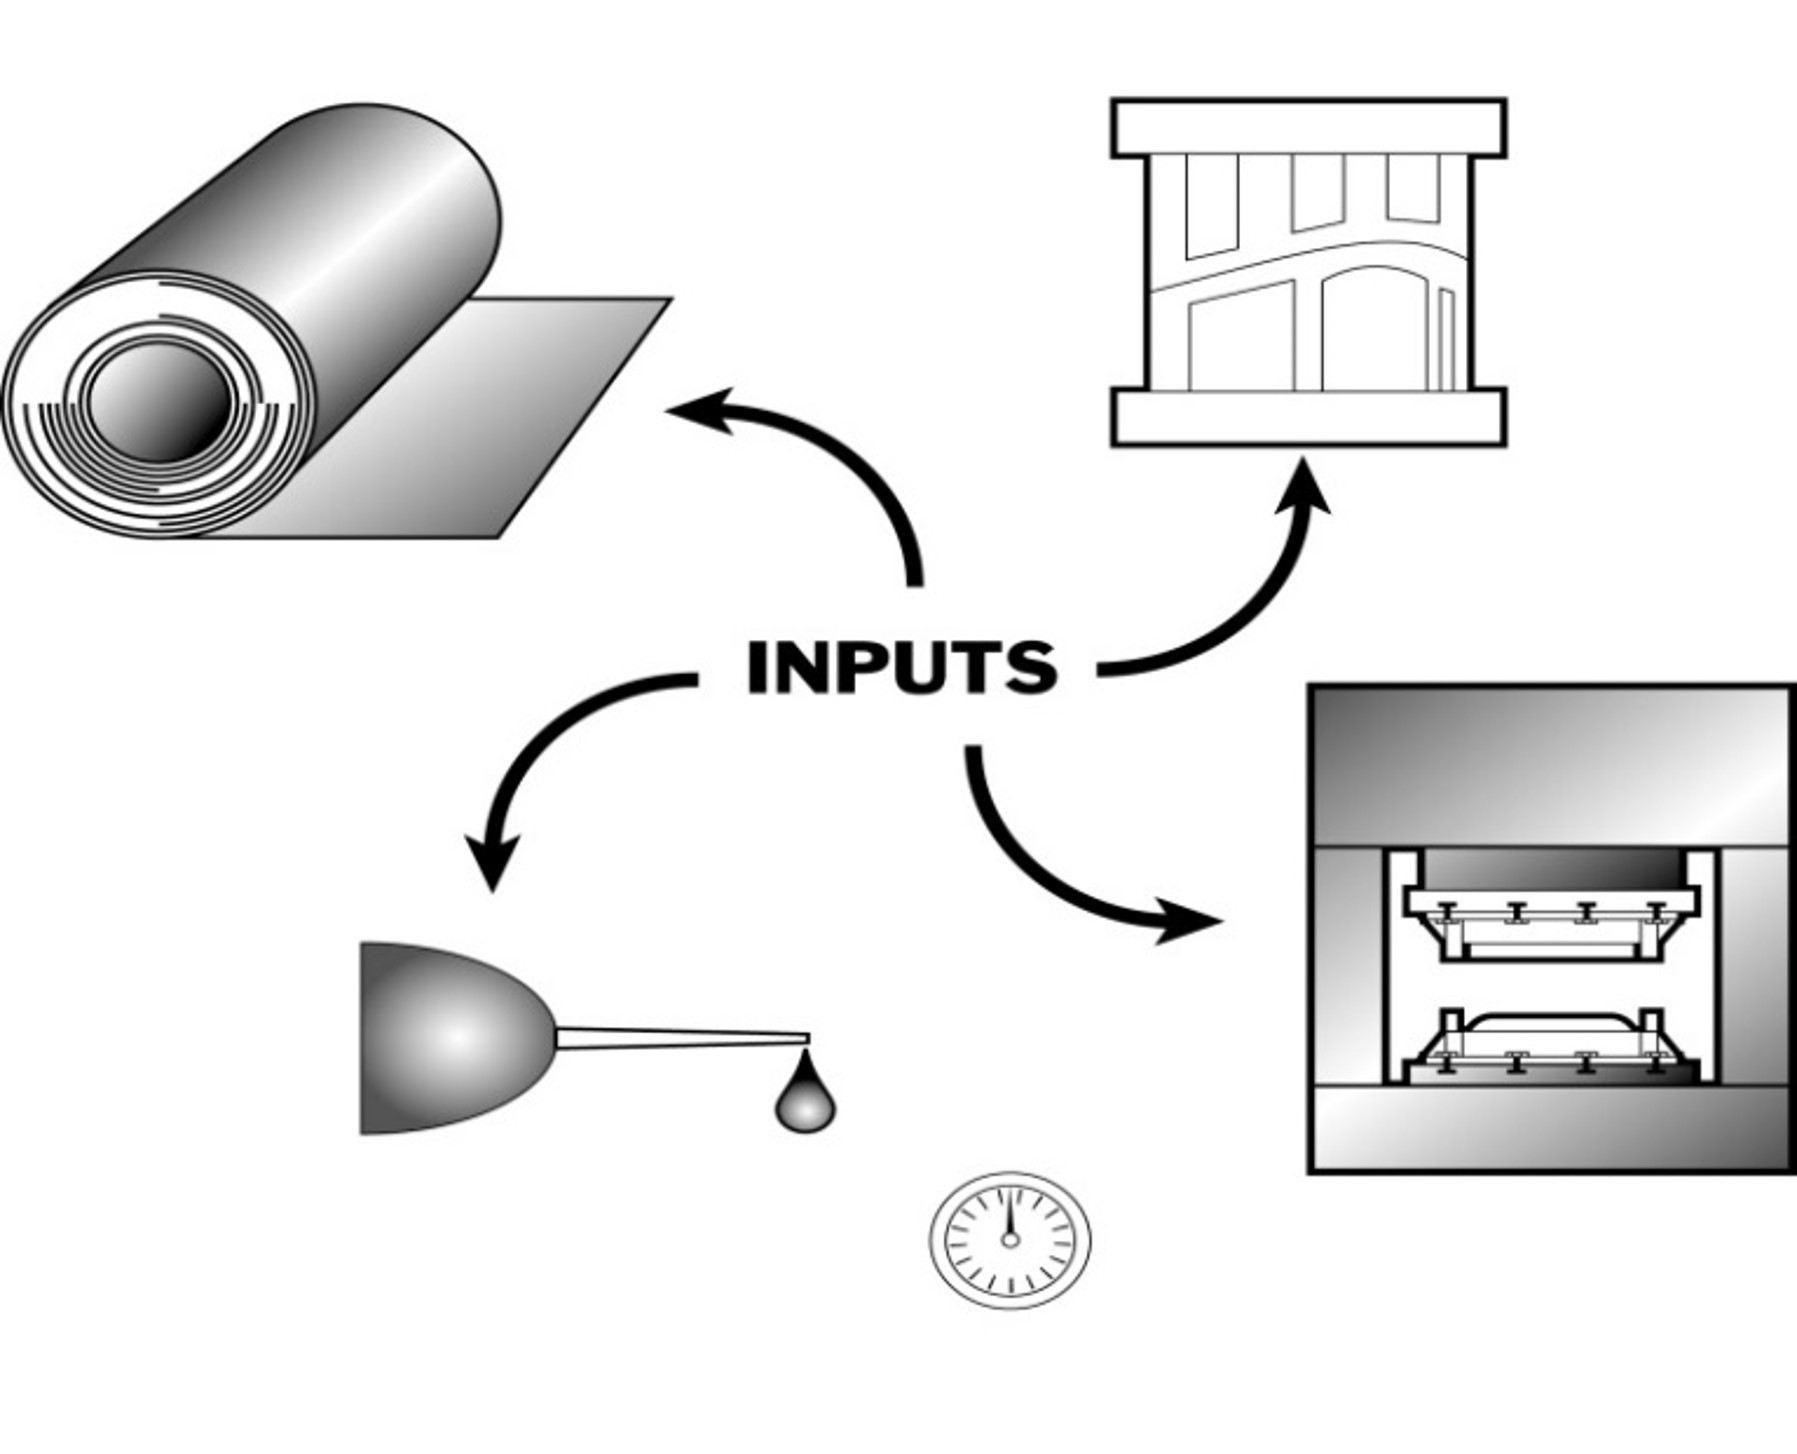 Figure 1: Stamping pressroom critical inputs including the steel, lubricant, press and die.